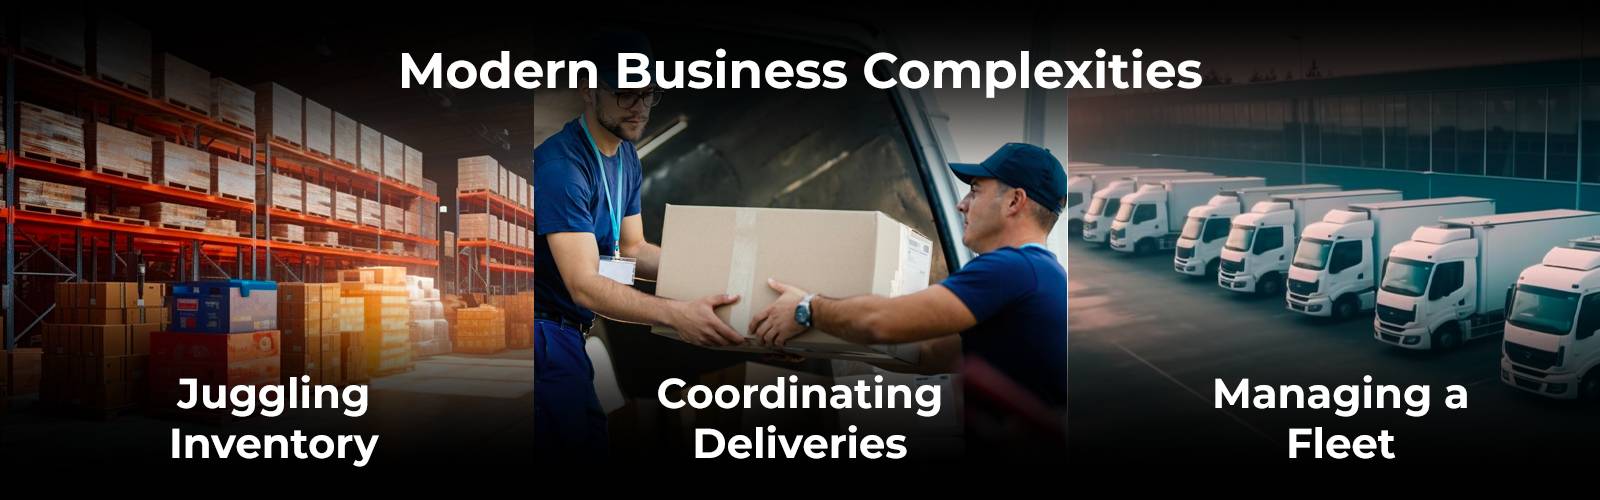 What are the modern business complexities